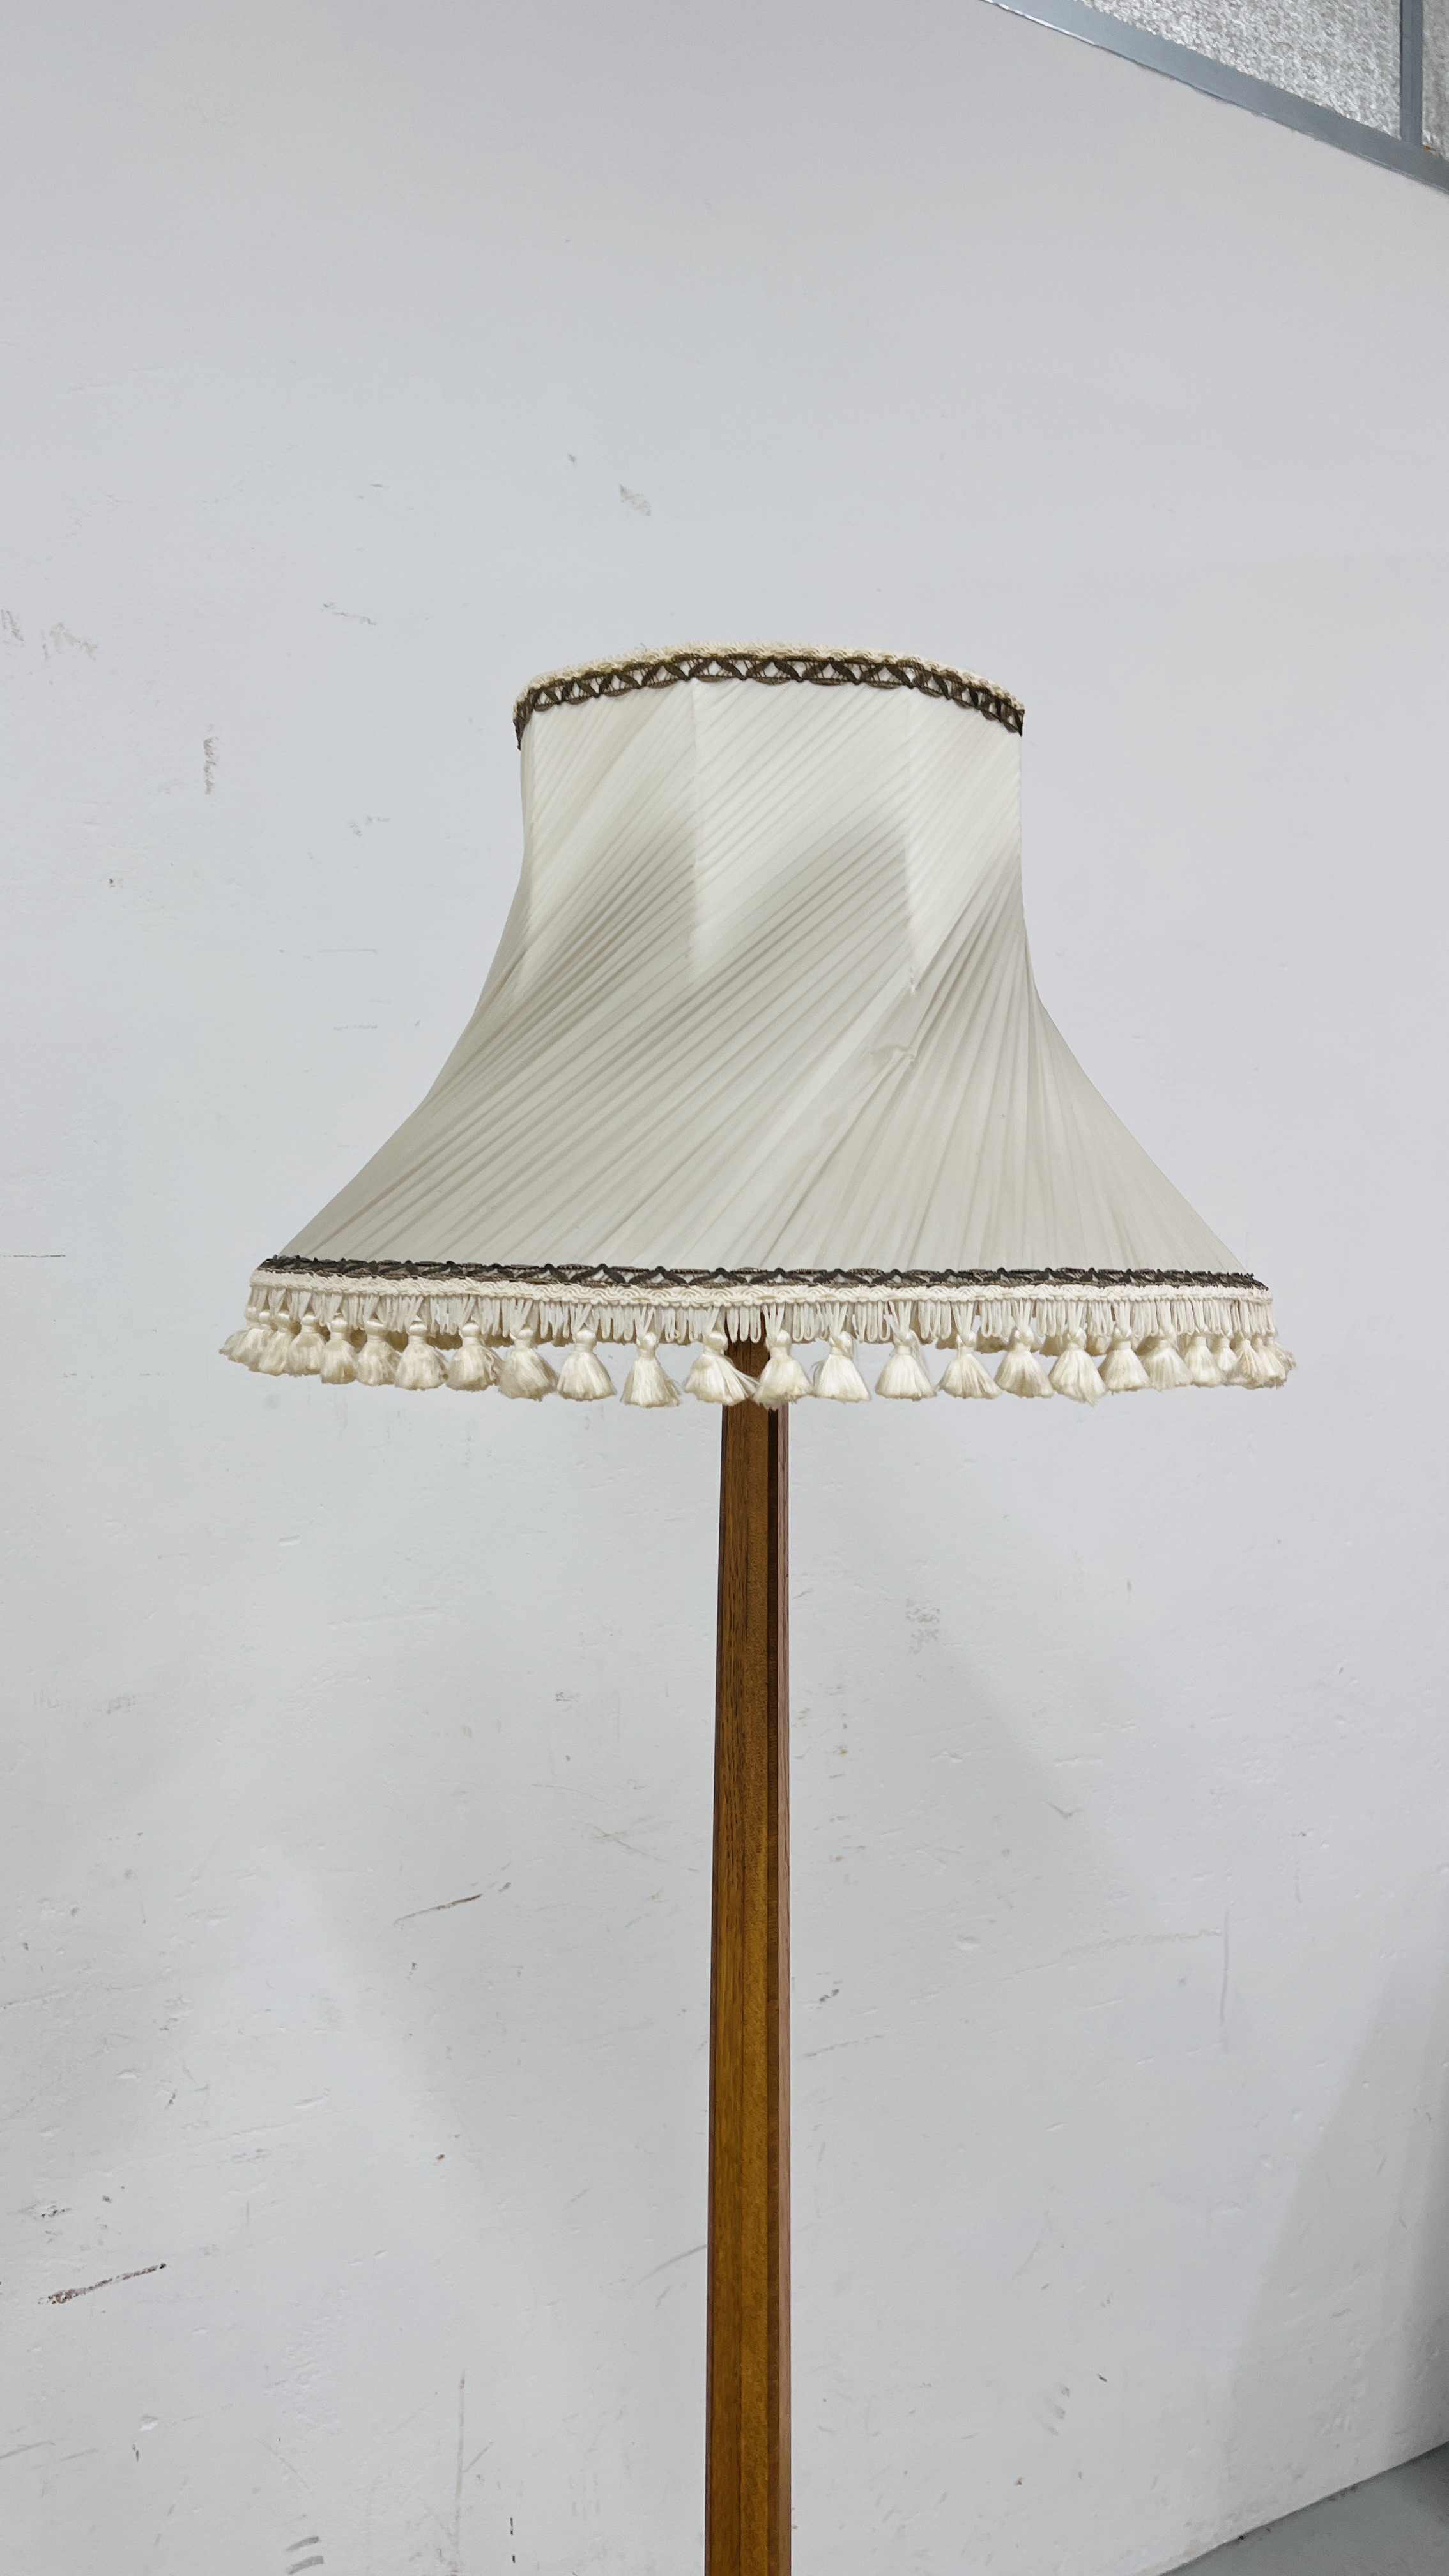 A RETRO BEECH WOOD TRIPOD FOOTED STANDARD LAMP WITH SHADE - WIRE REMOVED - DECO STYLE STANDARD LAMP - Image 8 of 8